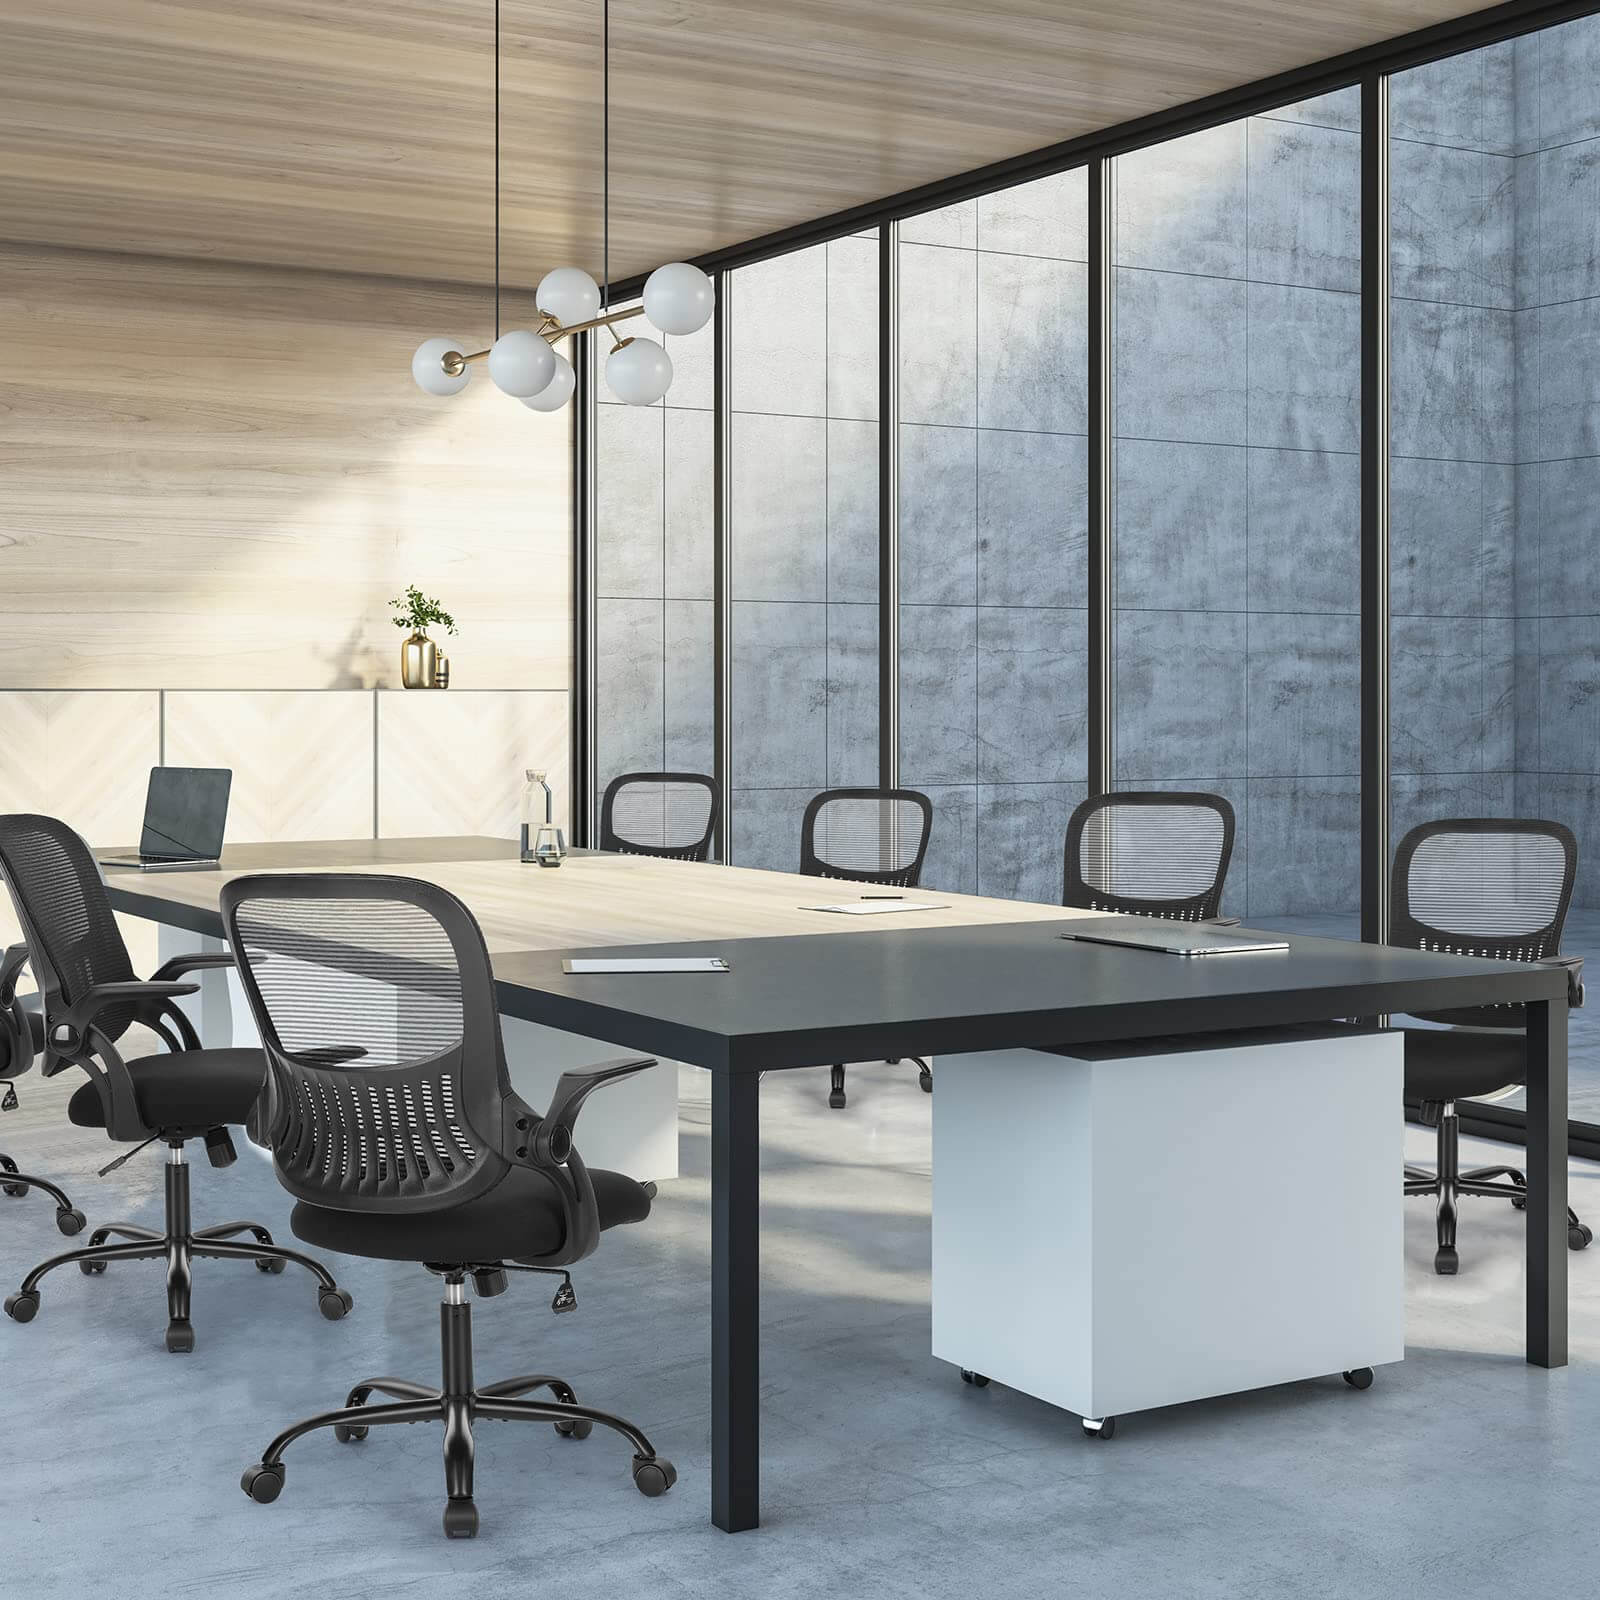 mesh-office-chairs#Color_Black#Quantity_2 Chair